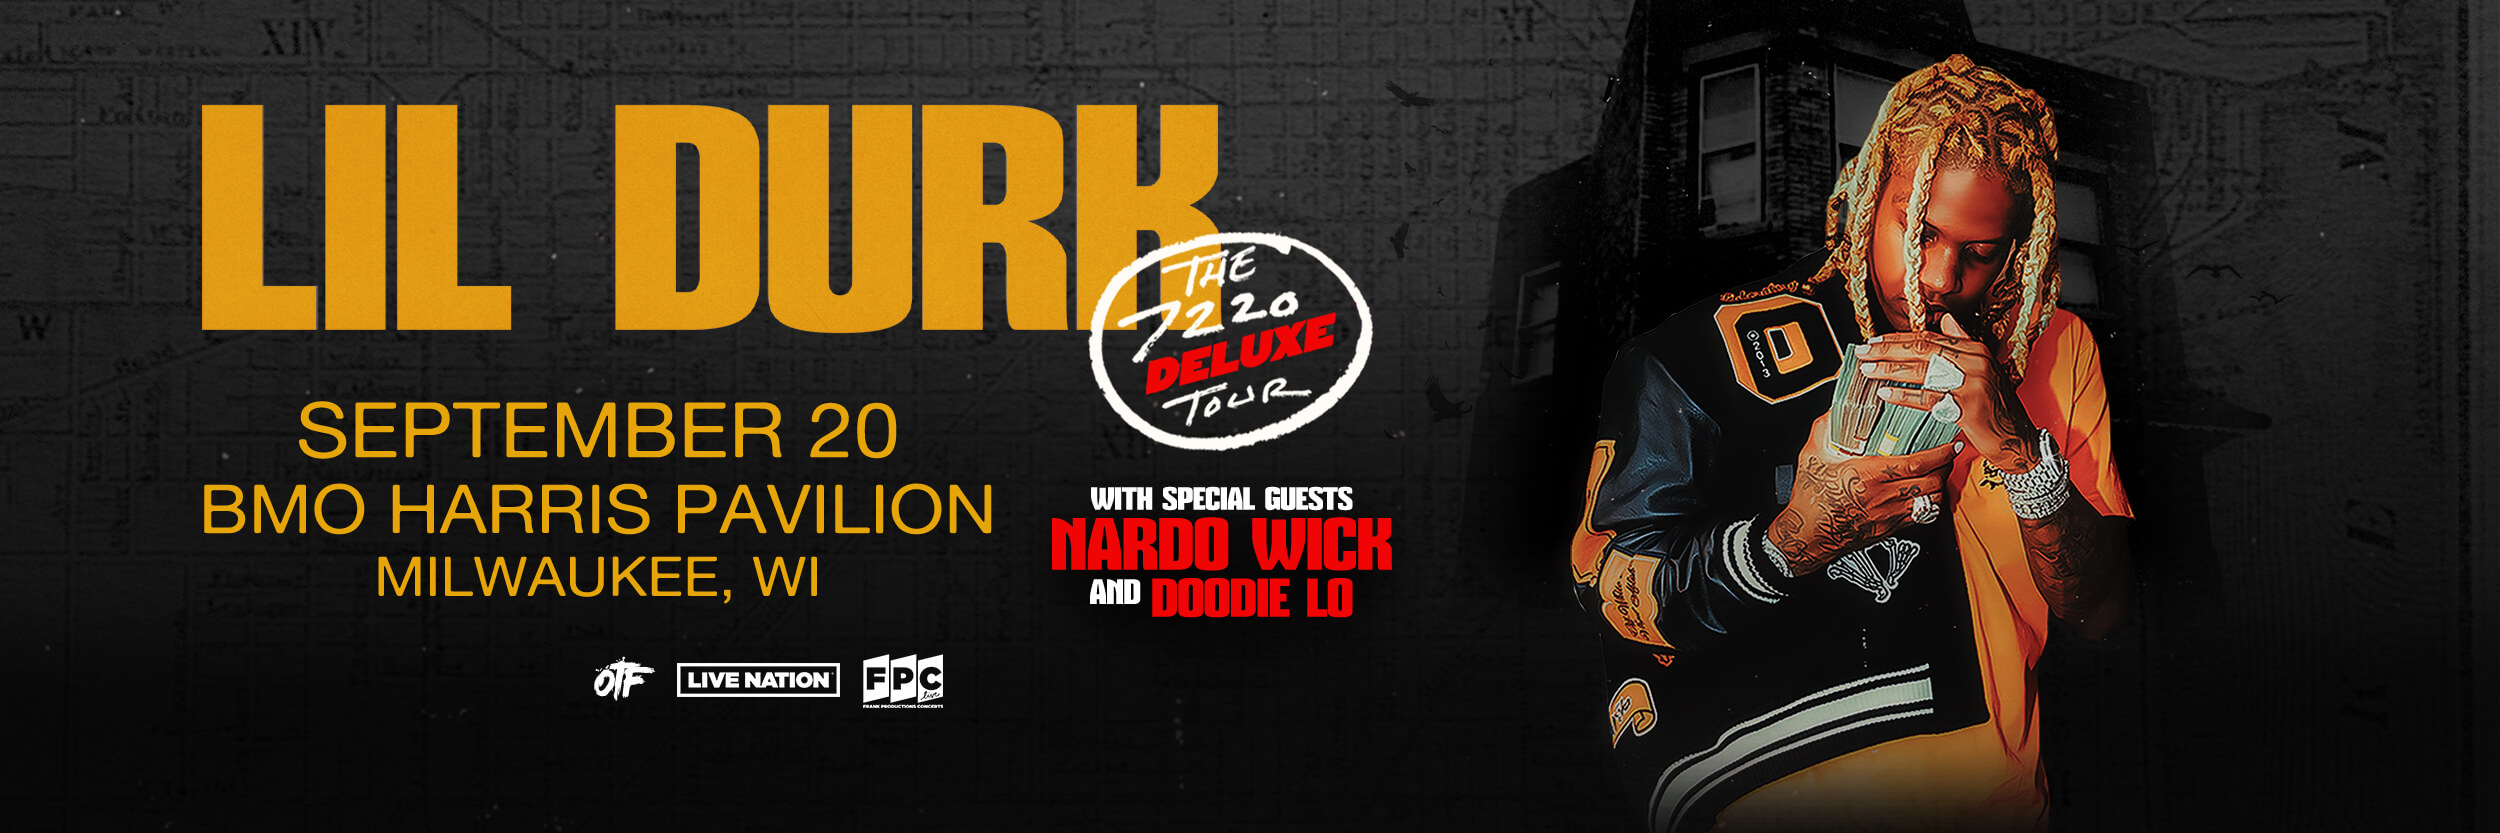 Lil Durk: The 7220 Deluxe Tour